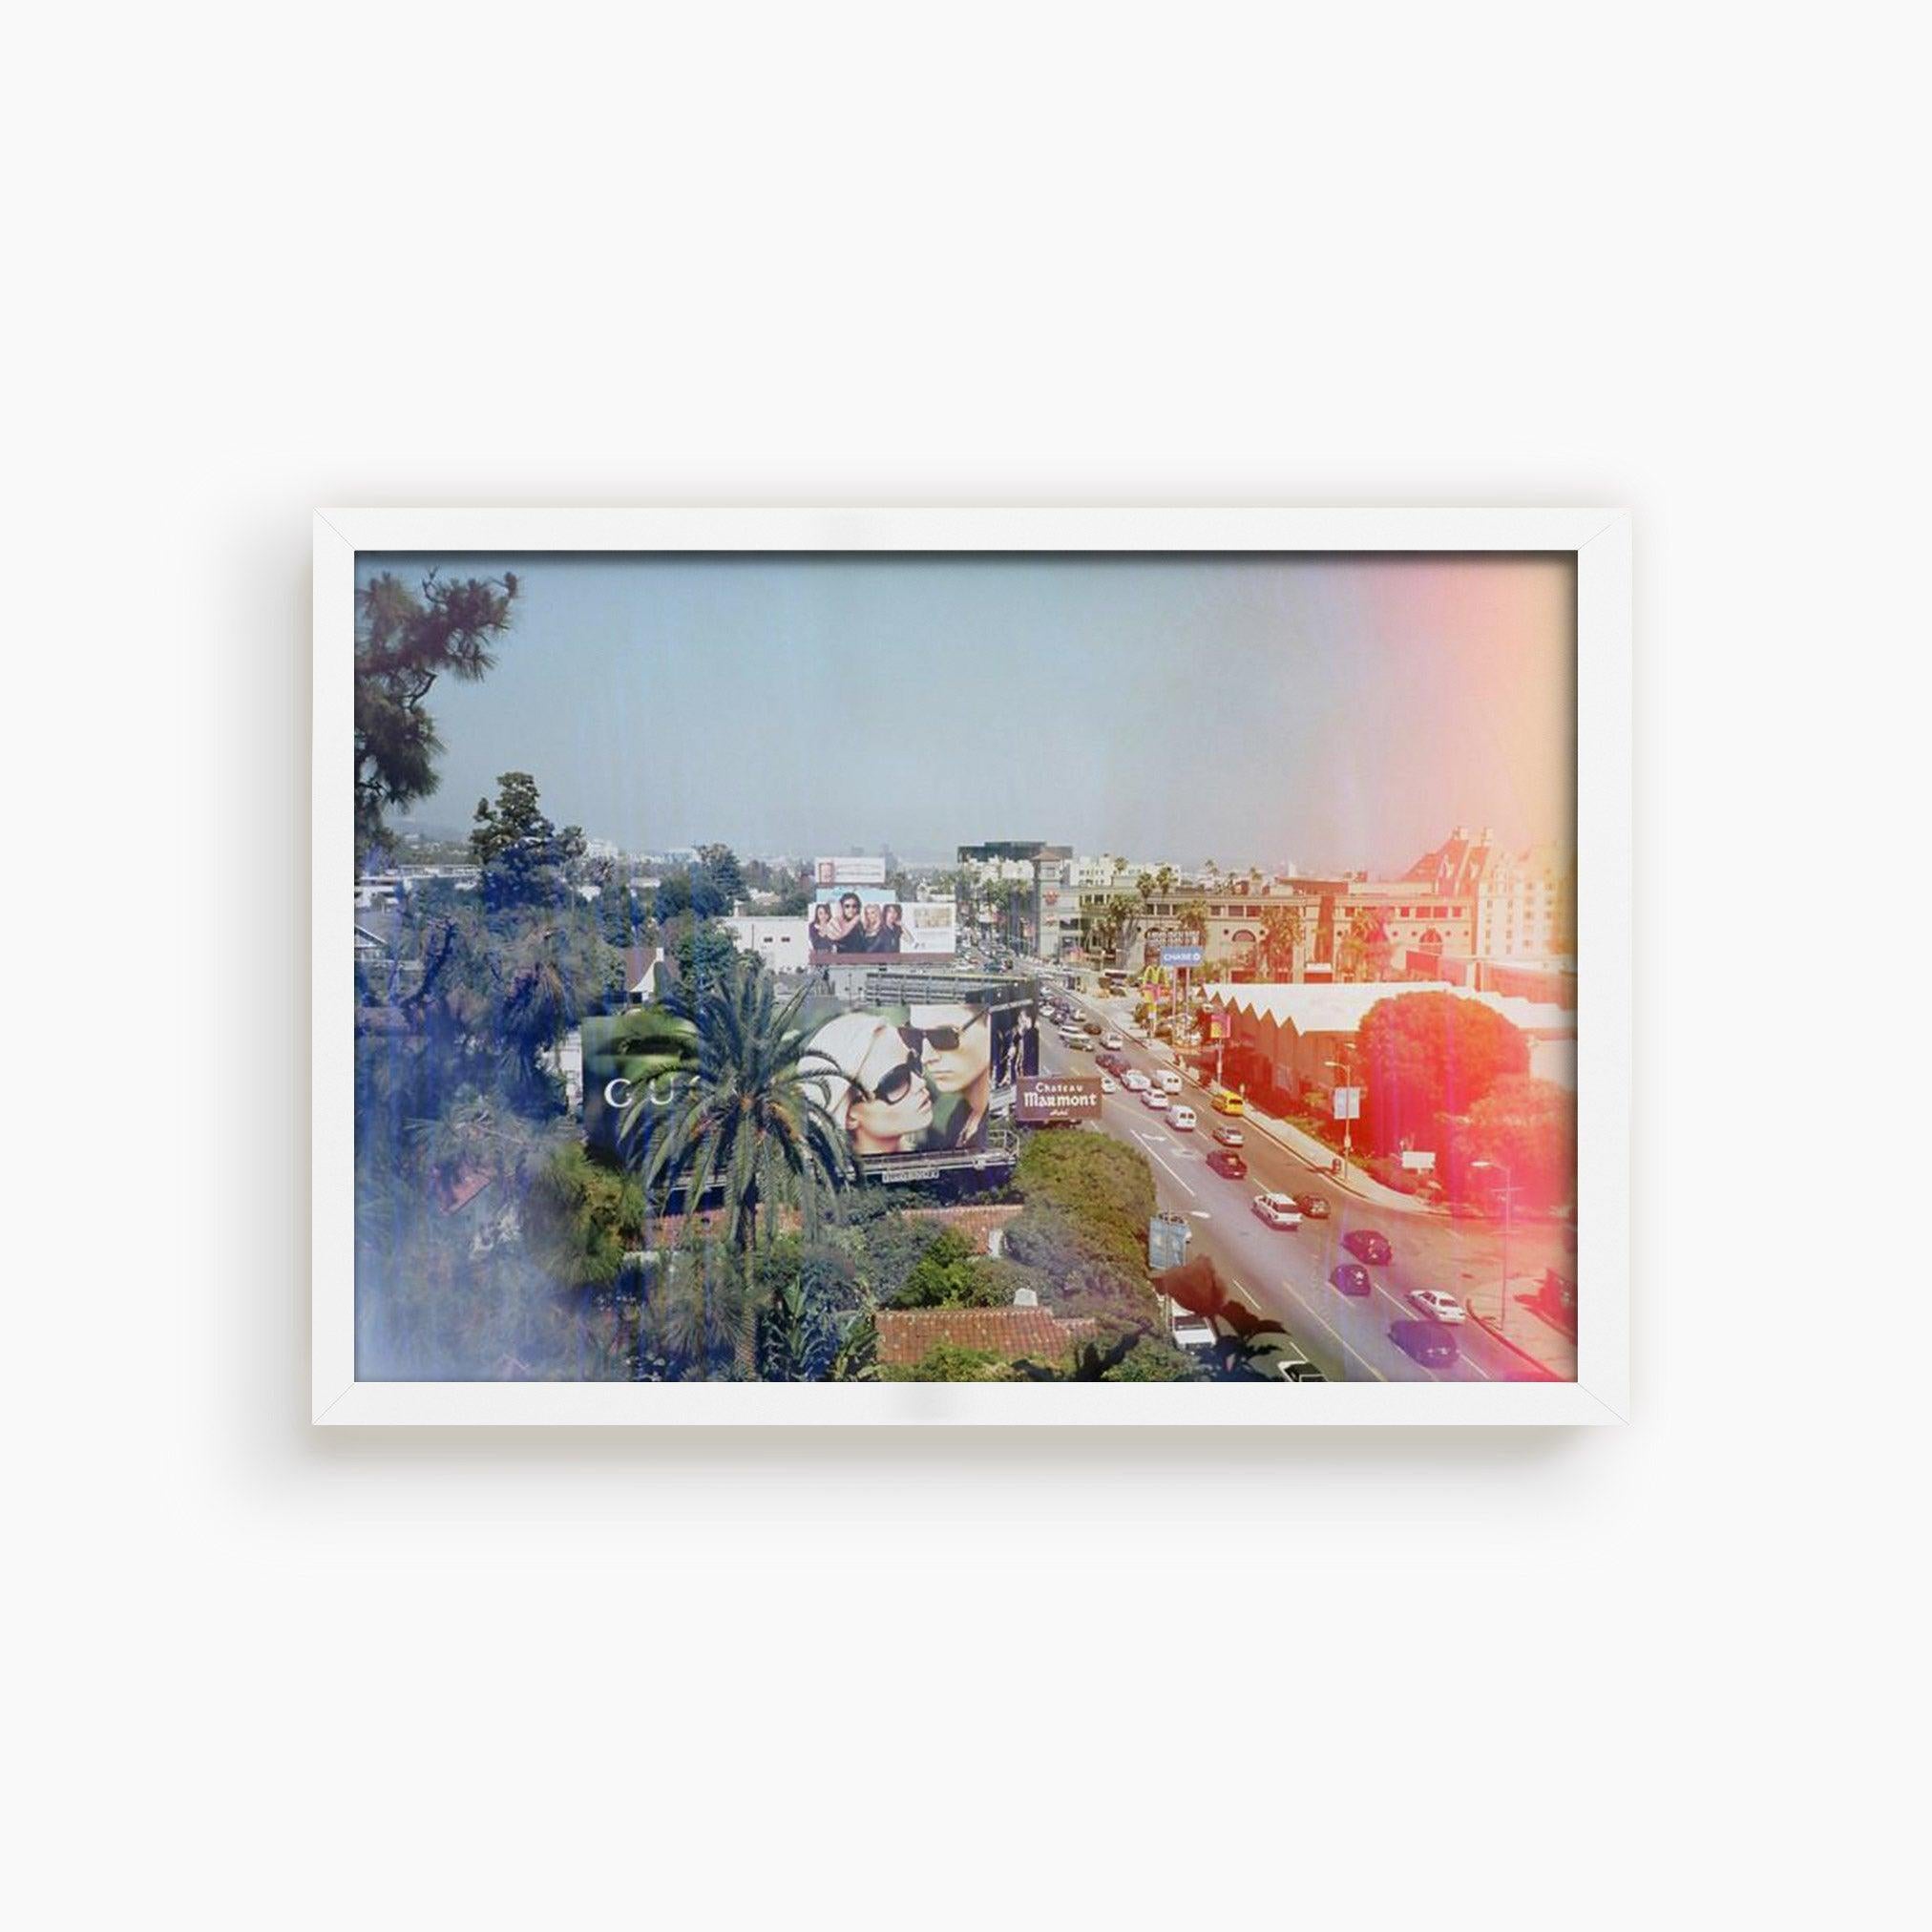 Chateau Marmont , Photograph by Chateau Marmont Tappan